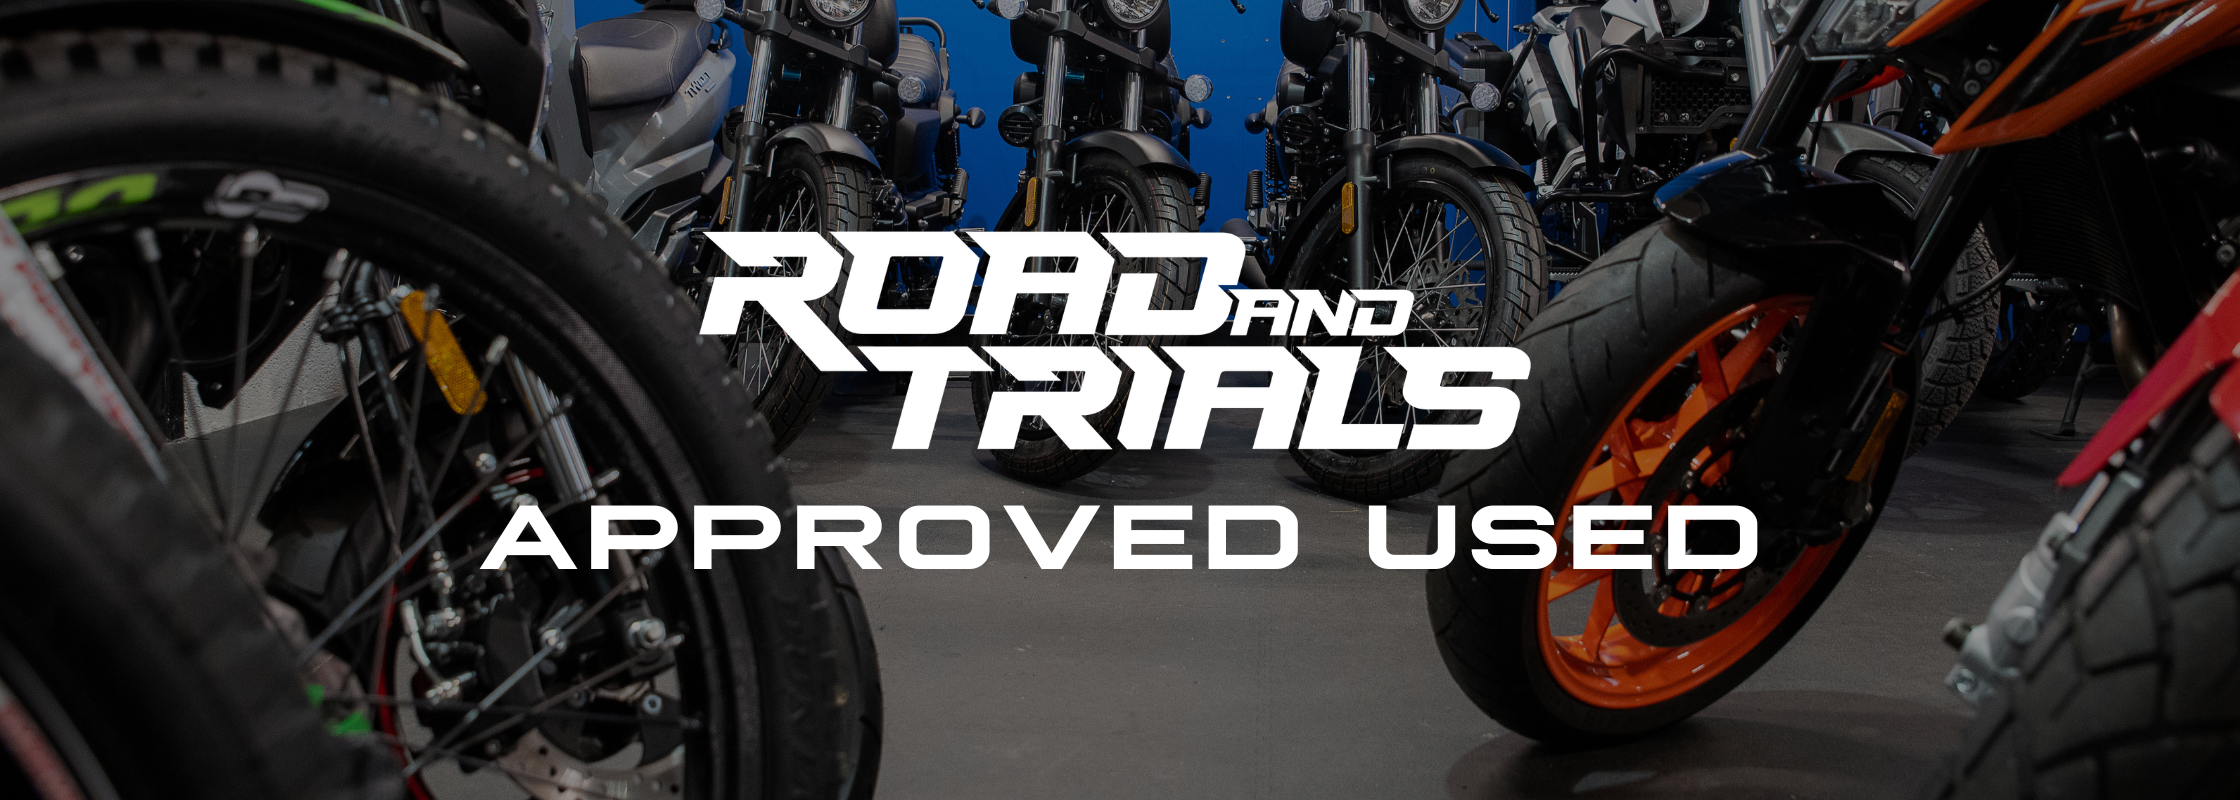 Approved used road bikes for sale barnsley south yorkshire road and trials